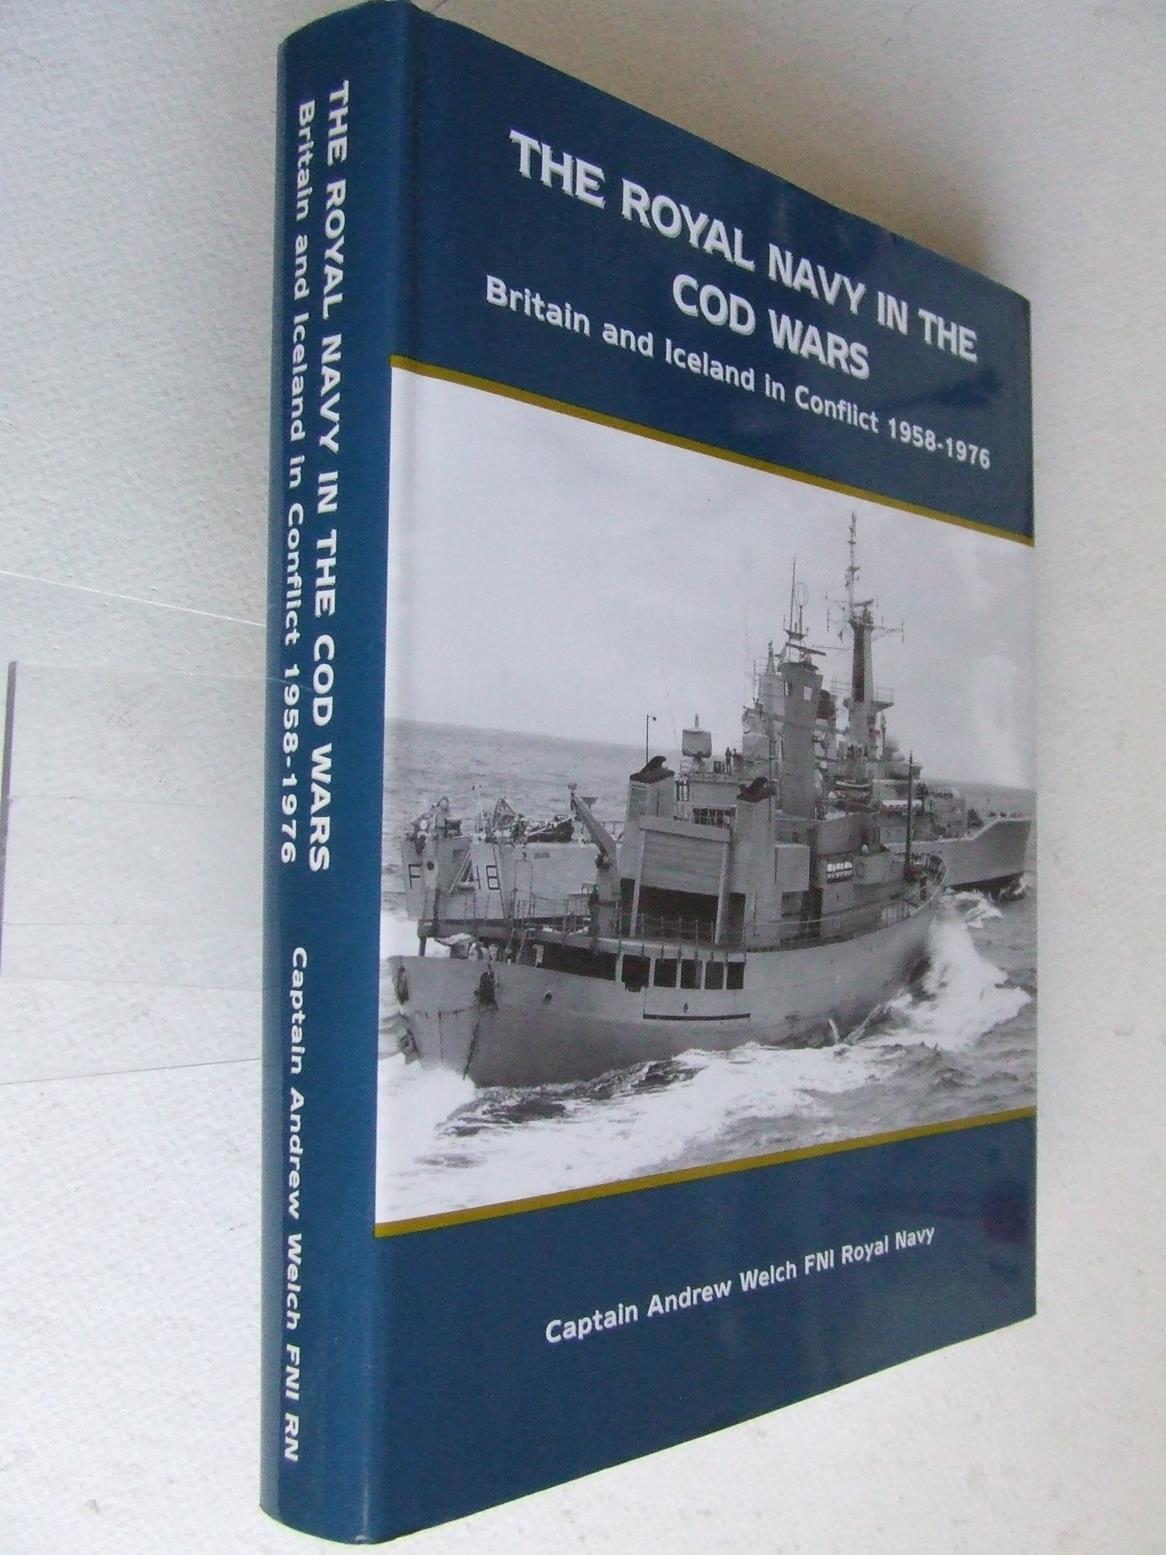 The Royal Navy in the Cod Wars